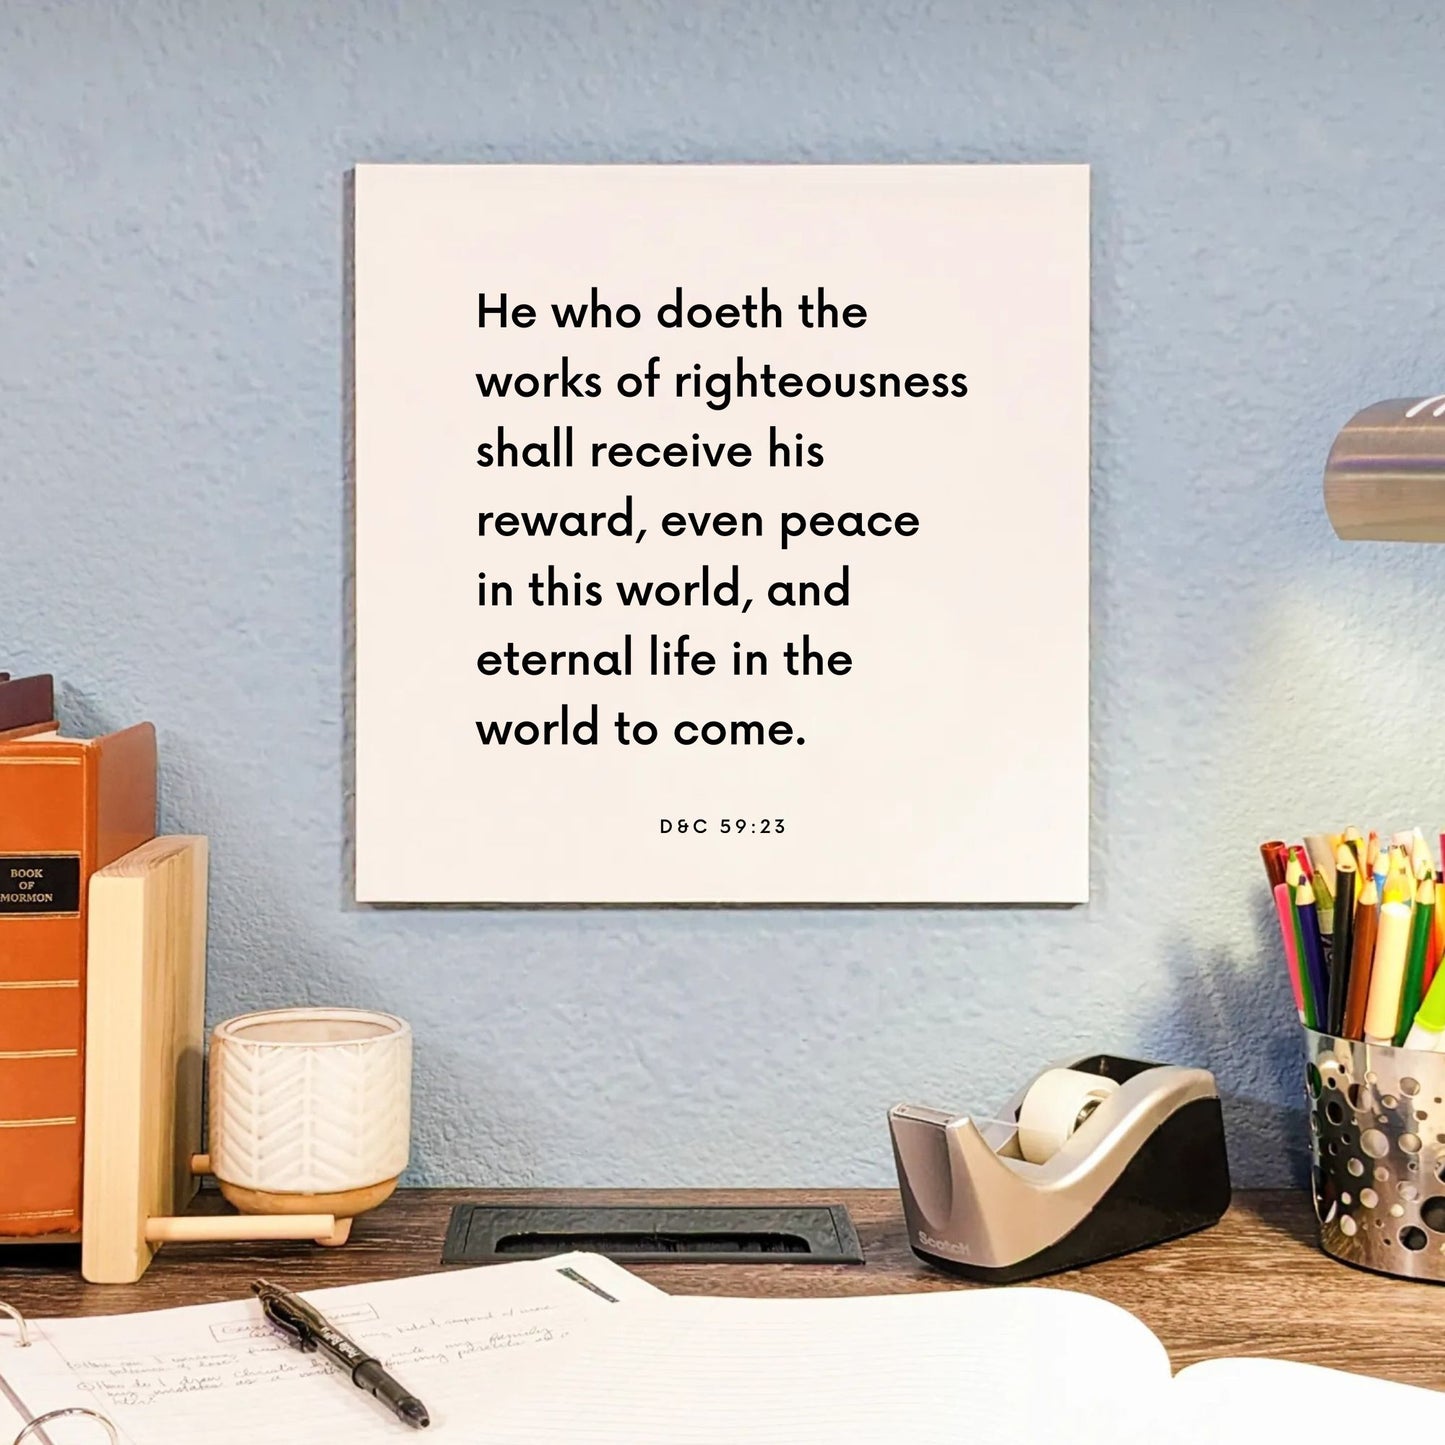 Desk mouting of the scripture tile for D&C 59:23 - "He who doeth the works of righteousness"